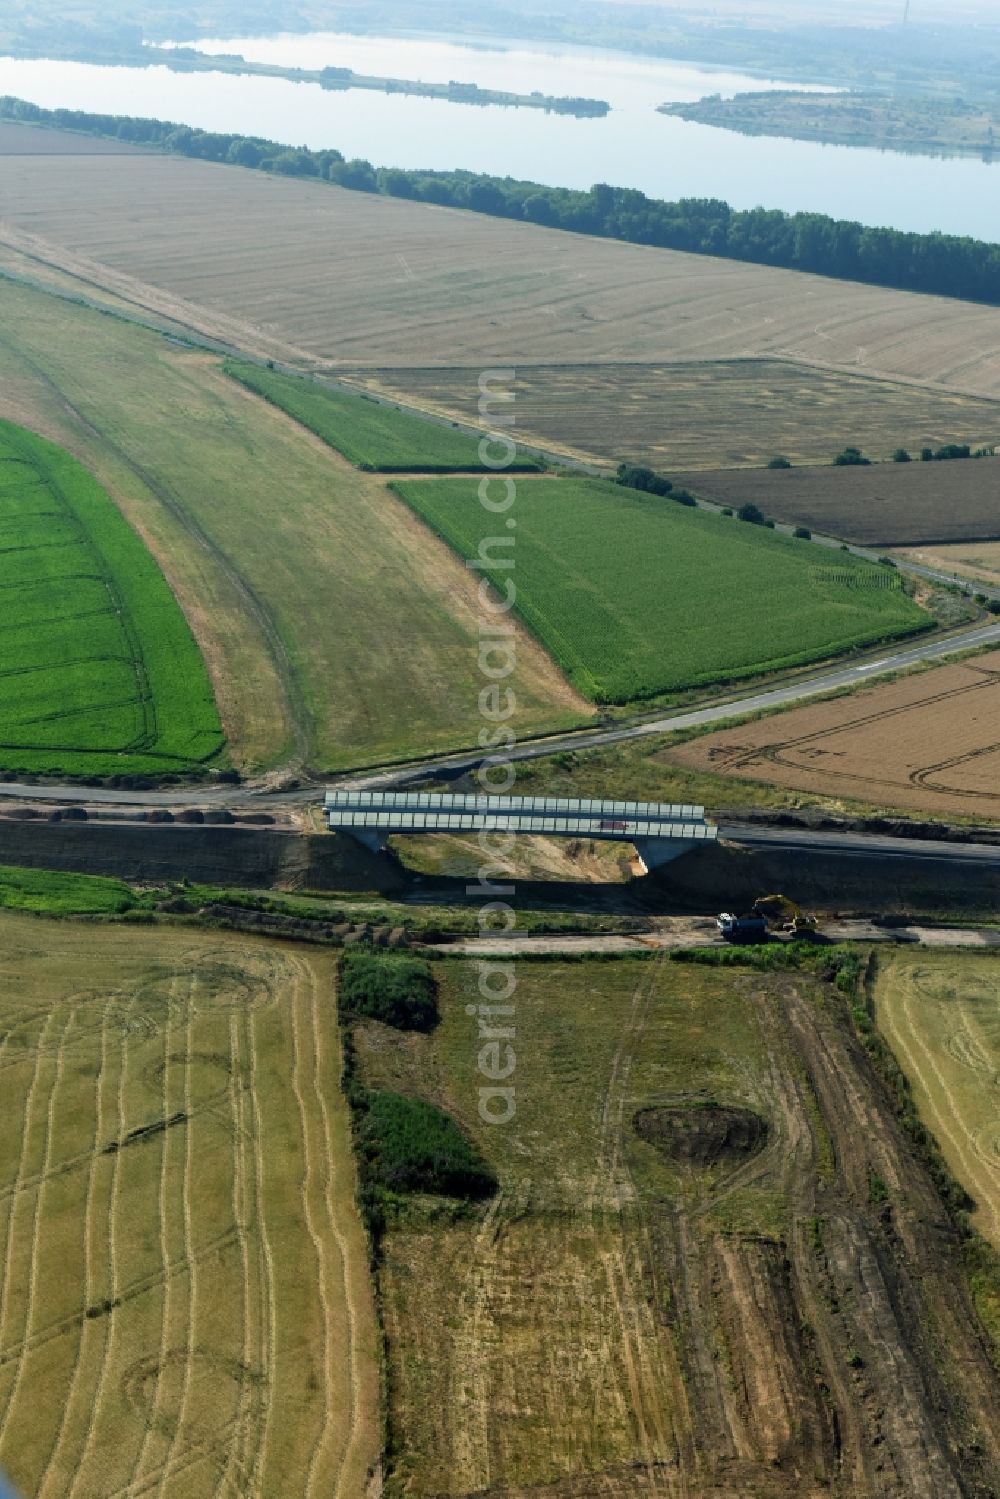 Espenhain from the bird's eye view: Finished bridge construction along the route and of the route of the highway route B95 to A72 motorway in Espenhain in the state Saxony